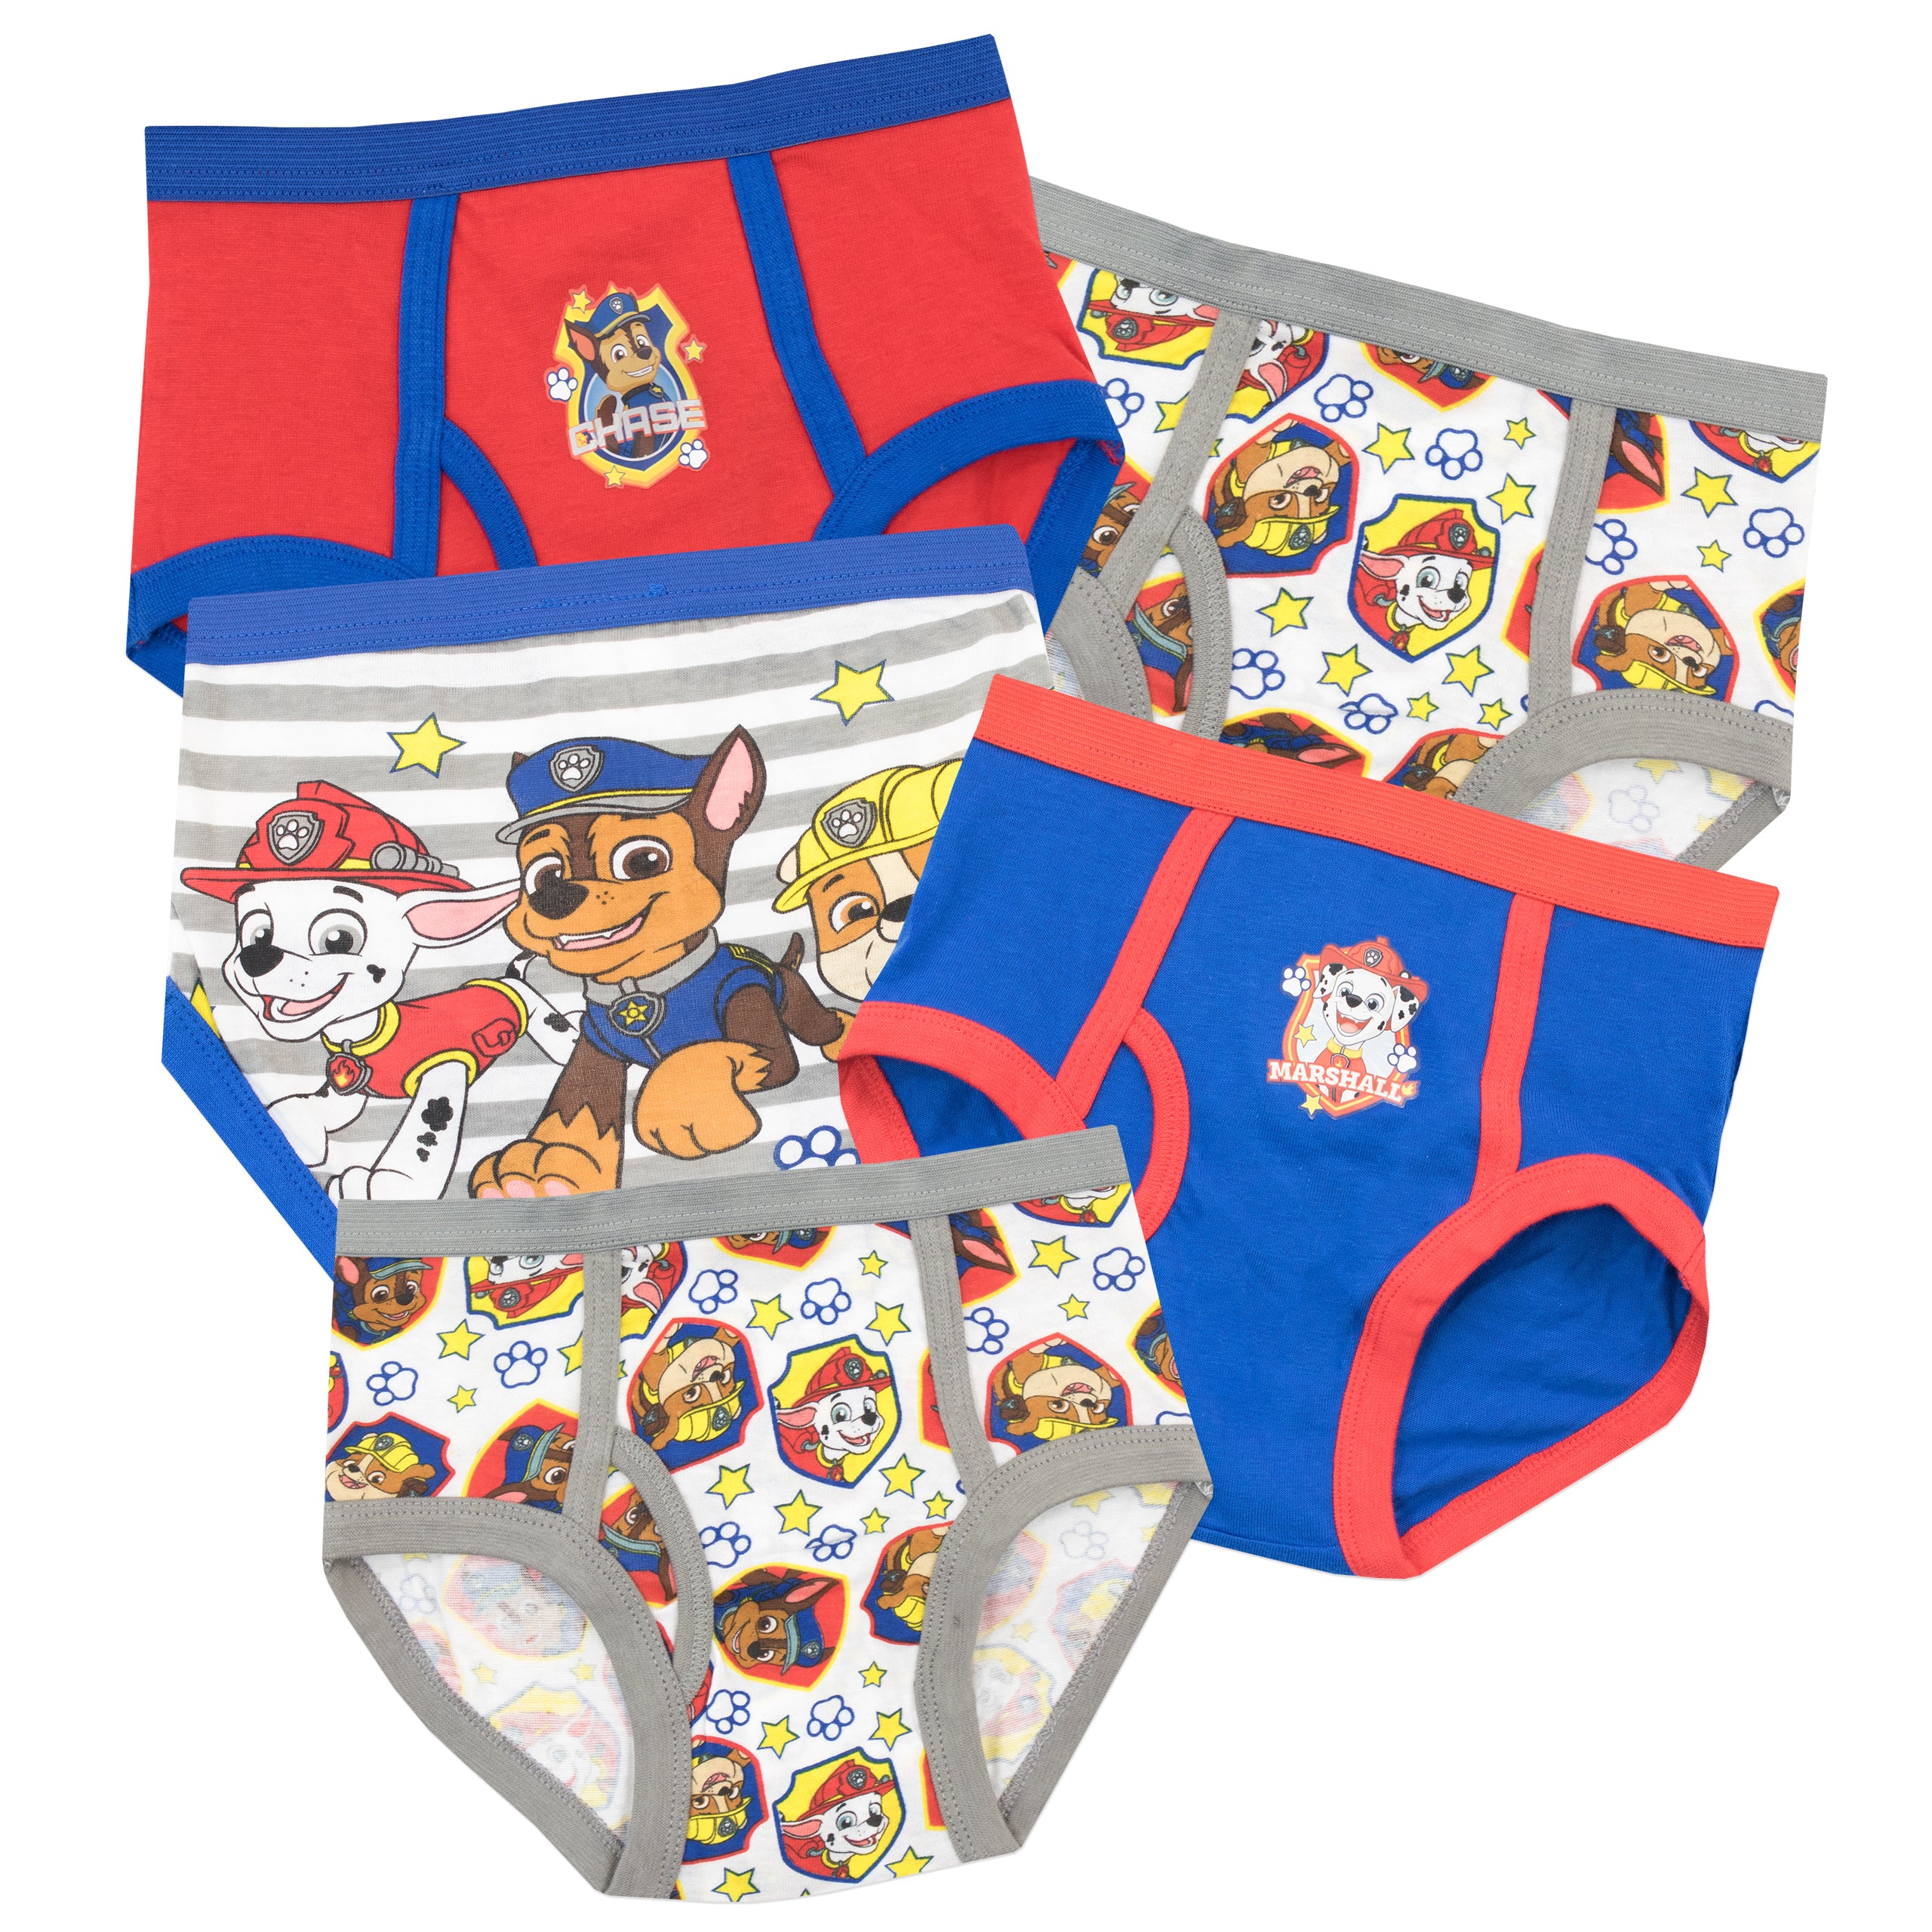 Buy Bluey Character Briefs 5 Pack 3-4 years, Underwear and socks